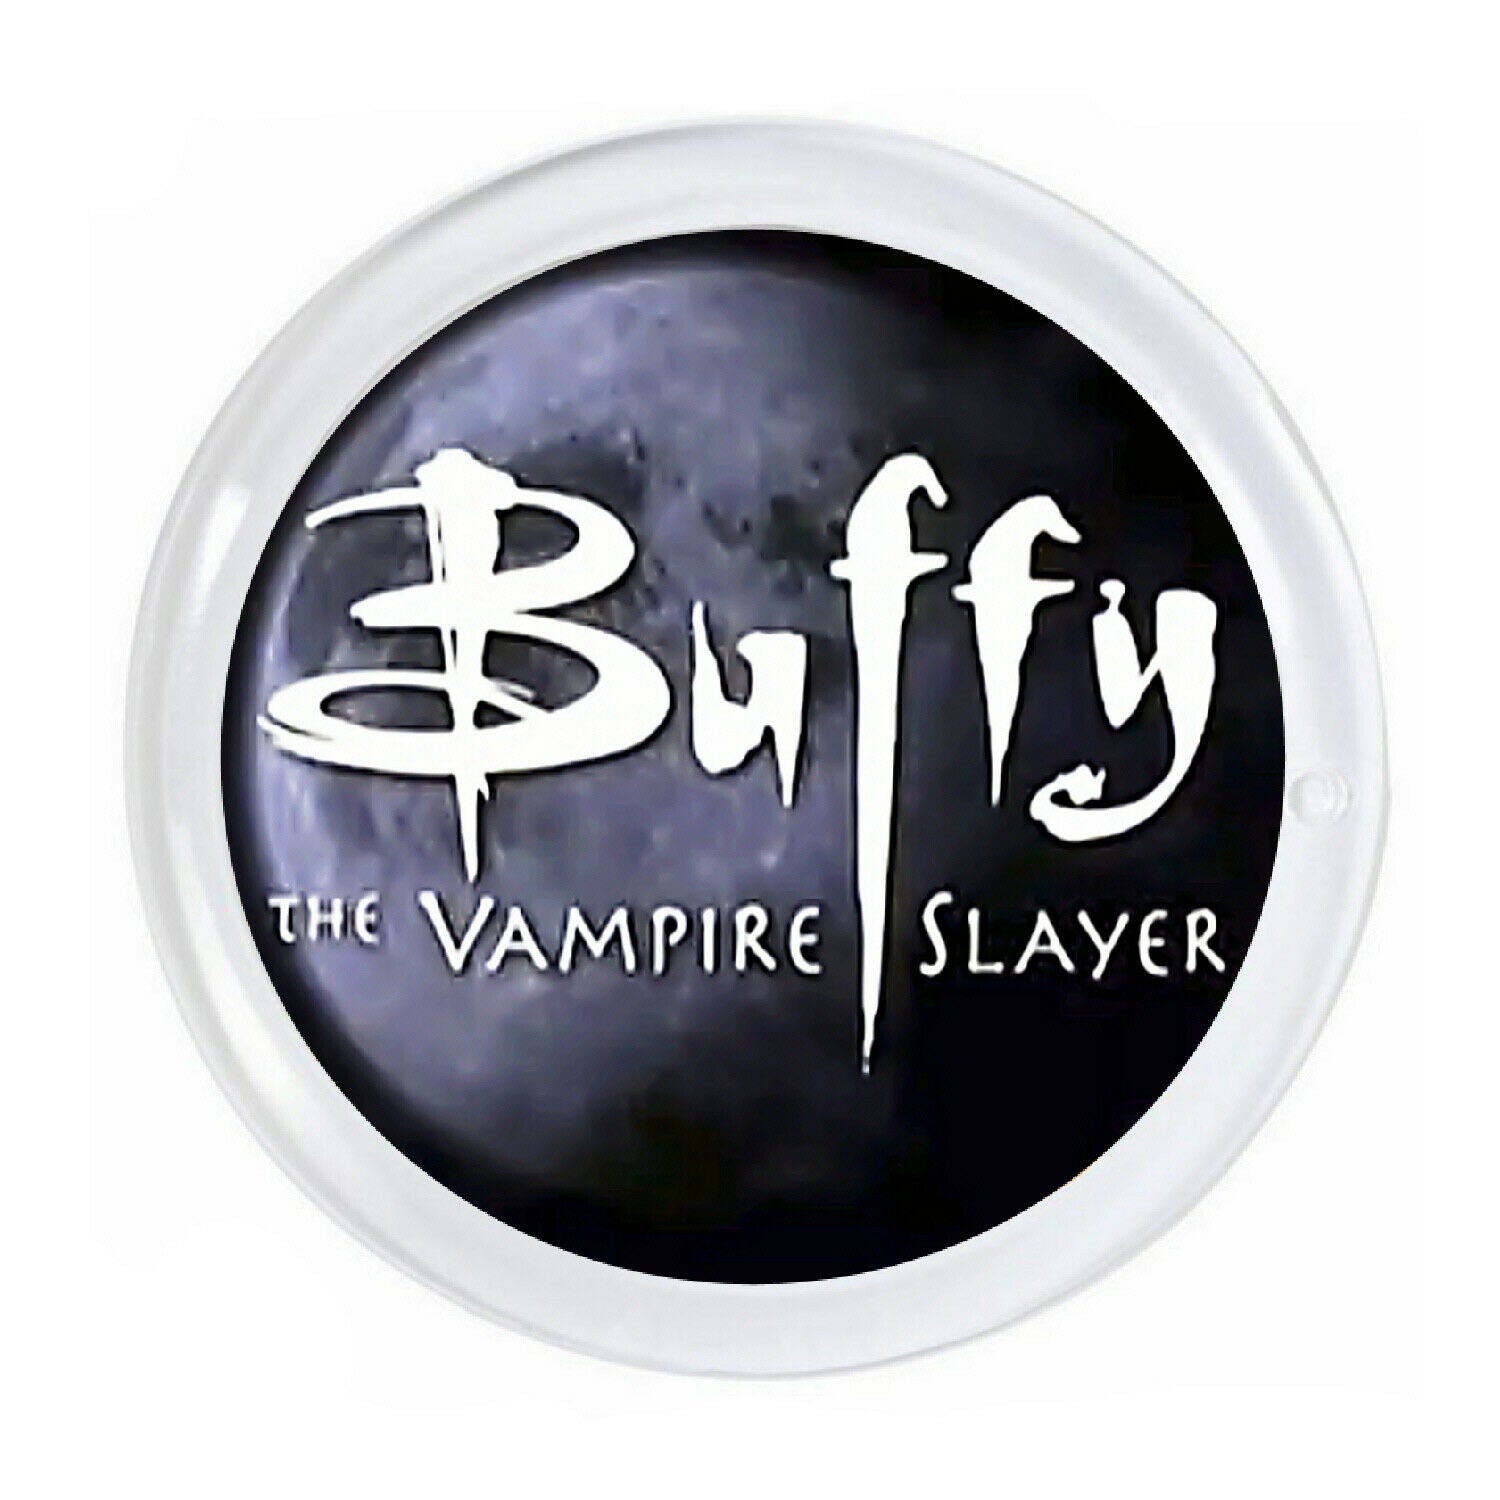 Buffy The Vampire Slayer Magnet big round almost 3 inch diameter with border.